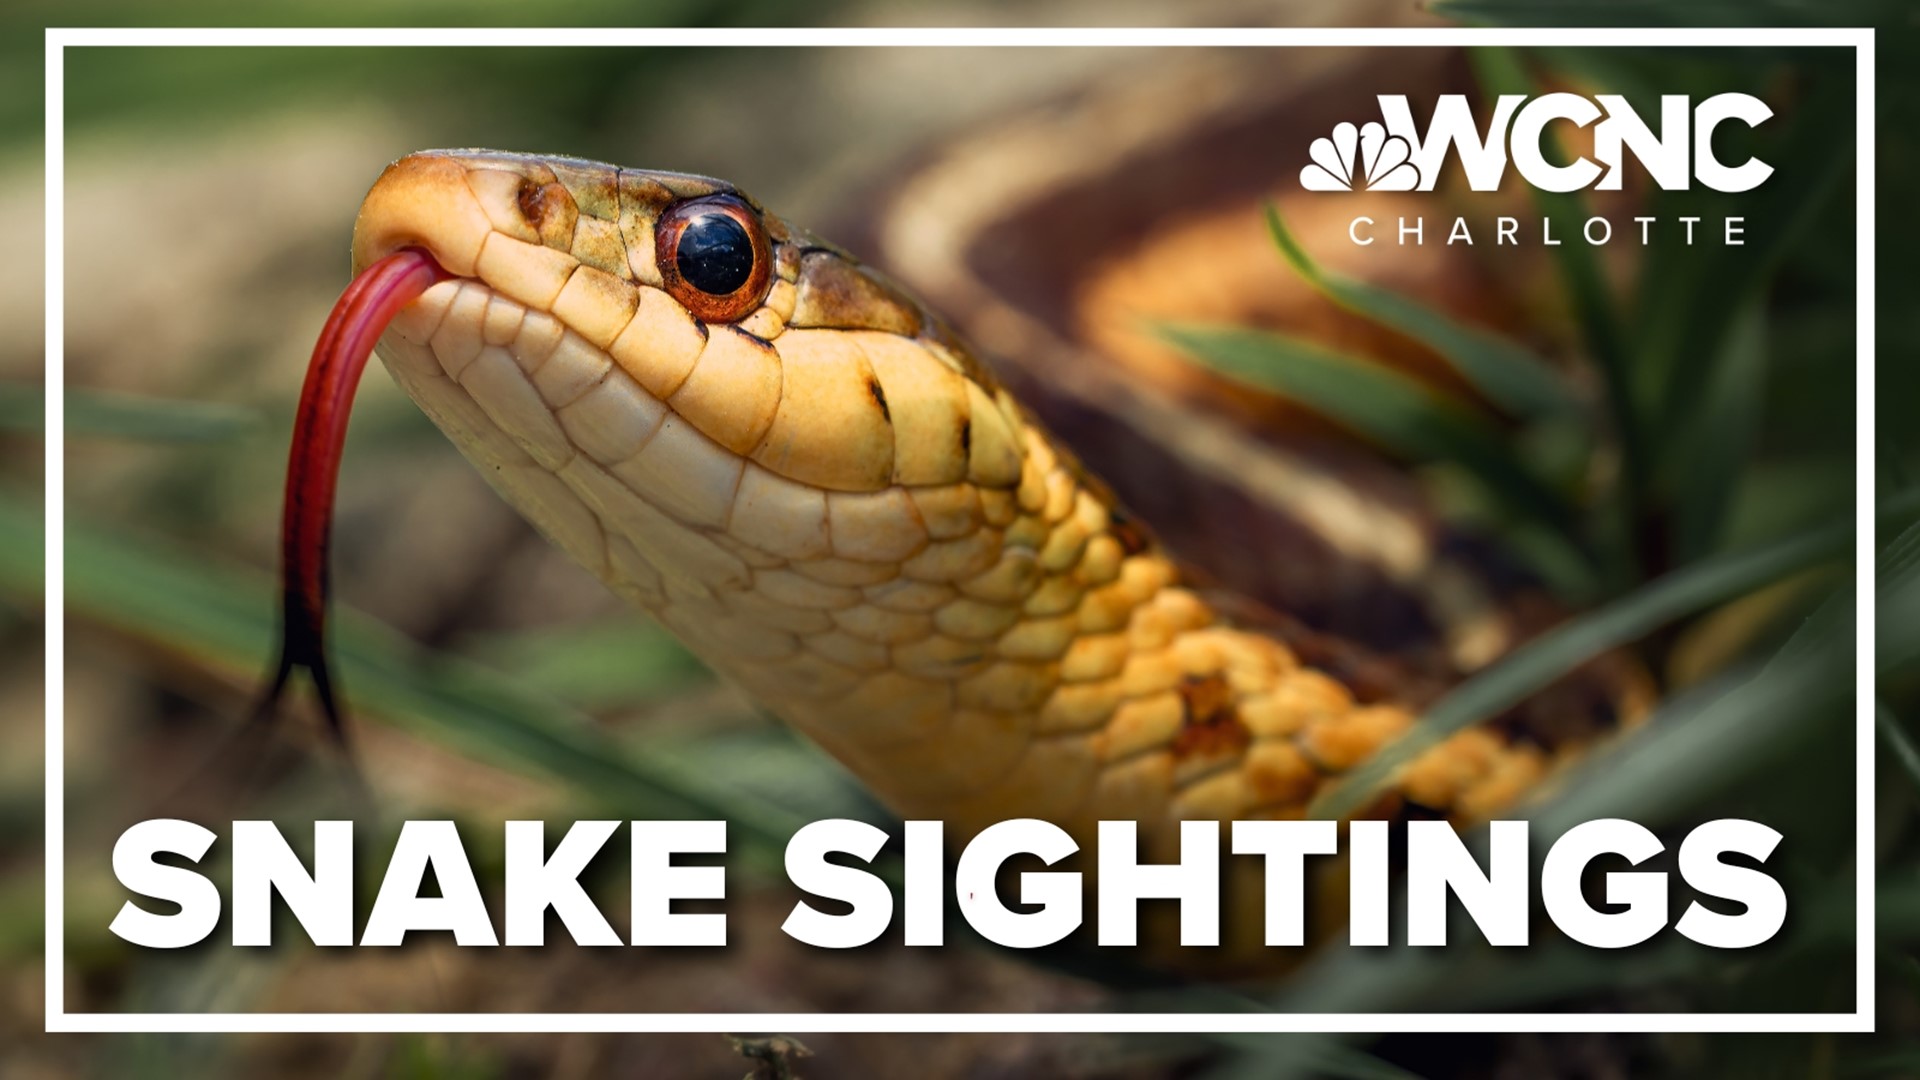 A heads up for people in the Carolinas! As the warm weather continues, you might see some more snakes.